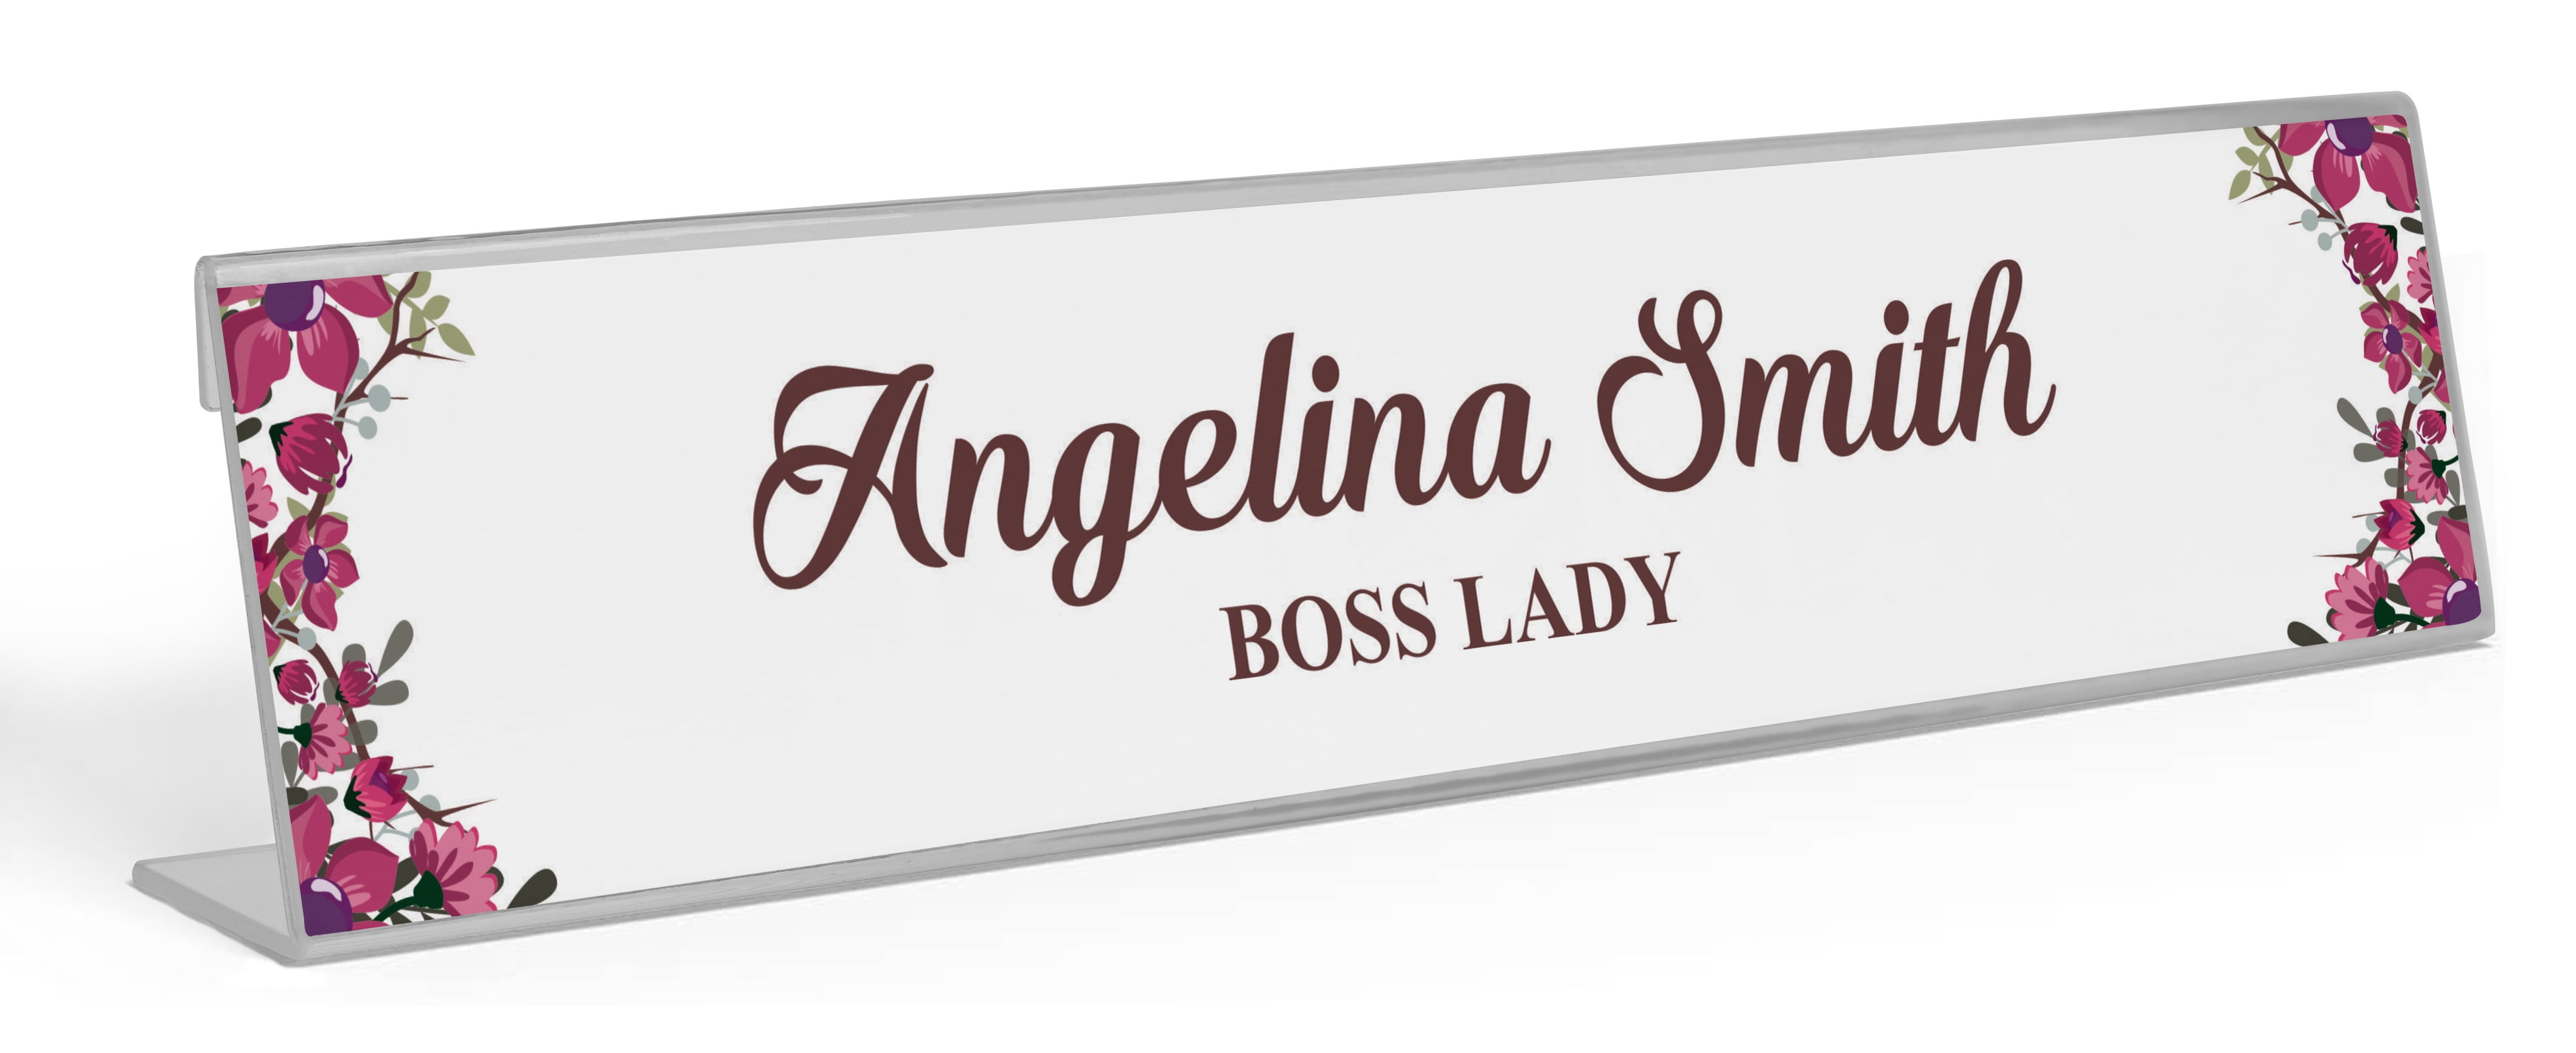 Personalized Desk Name plate 2x8" carbon fiber look with Black Metal Holder 